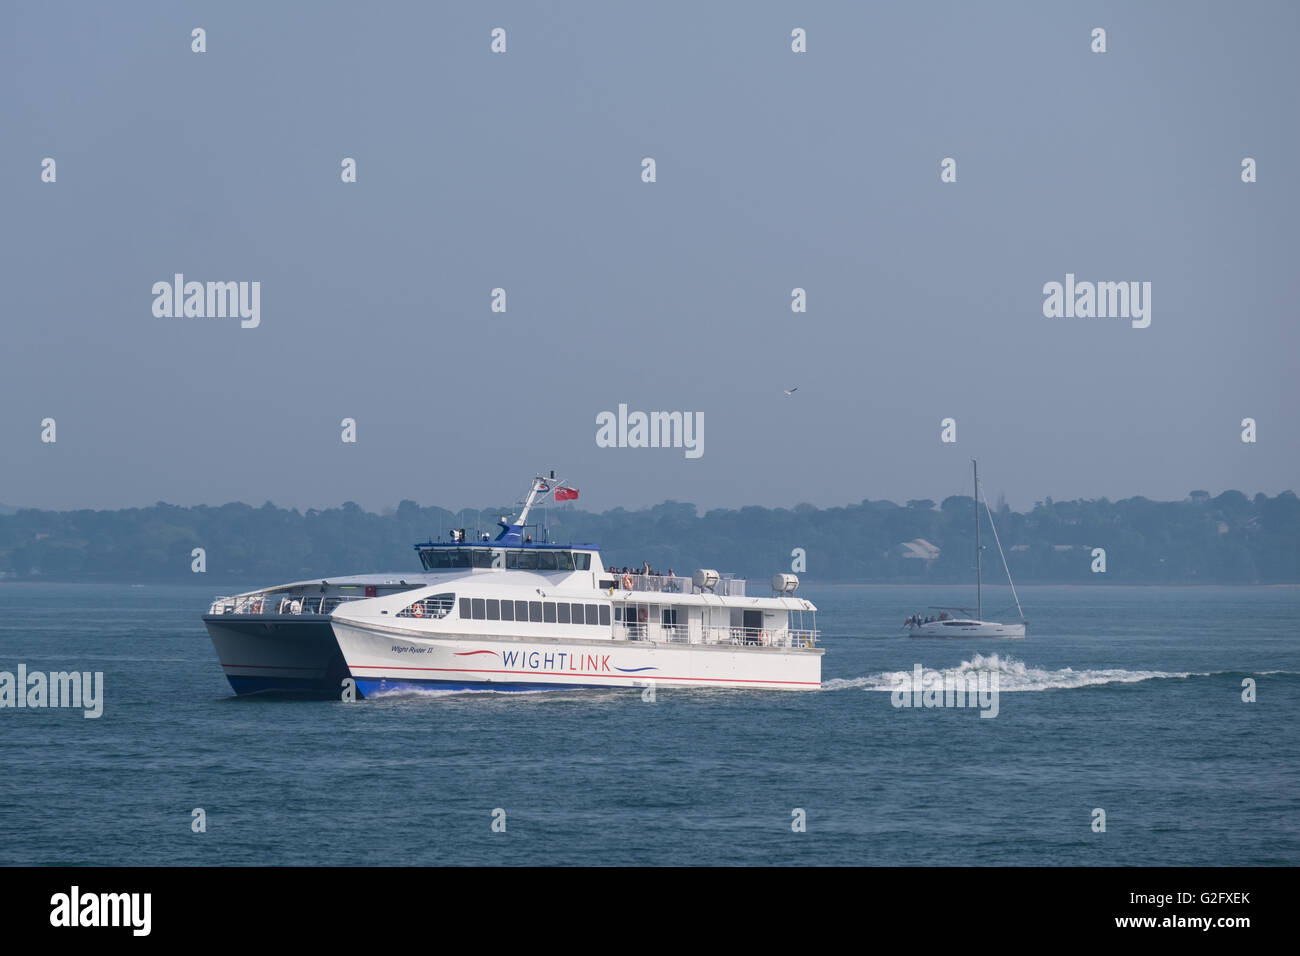 The Wightlink passenger ferry Wight Ryder 2 in the Solent on her way from Ryde Pier Head to Portsmouth Stock Photo